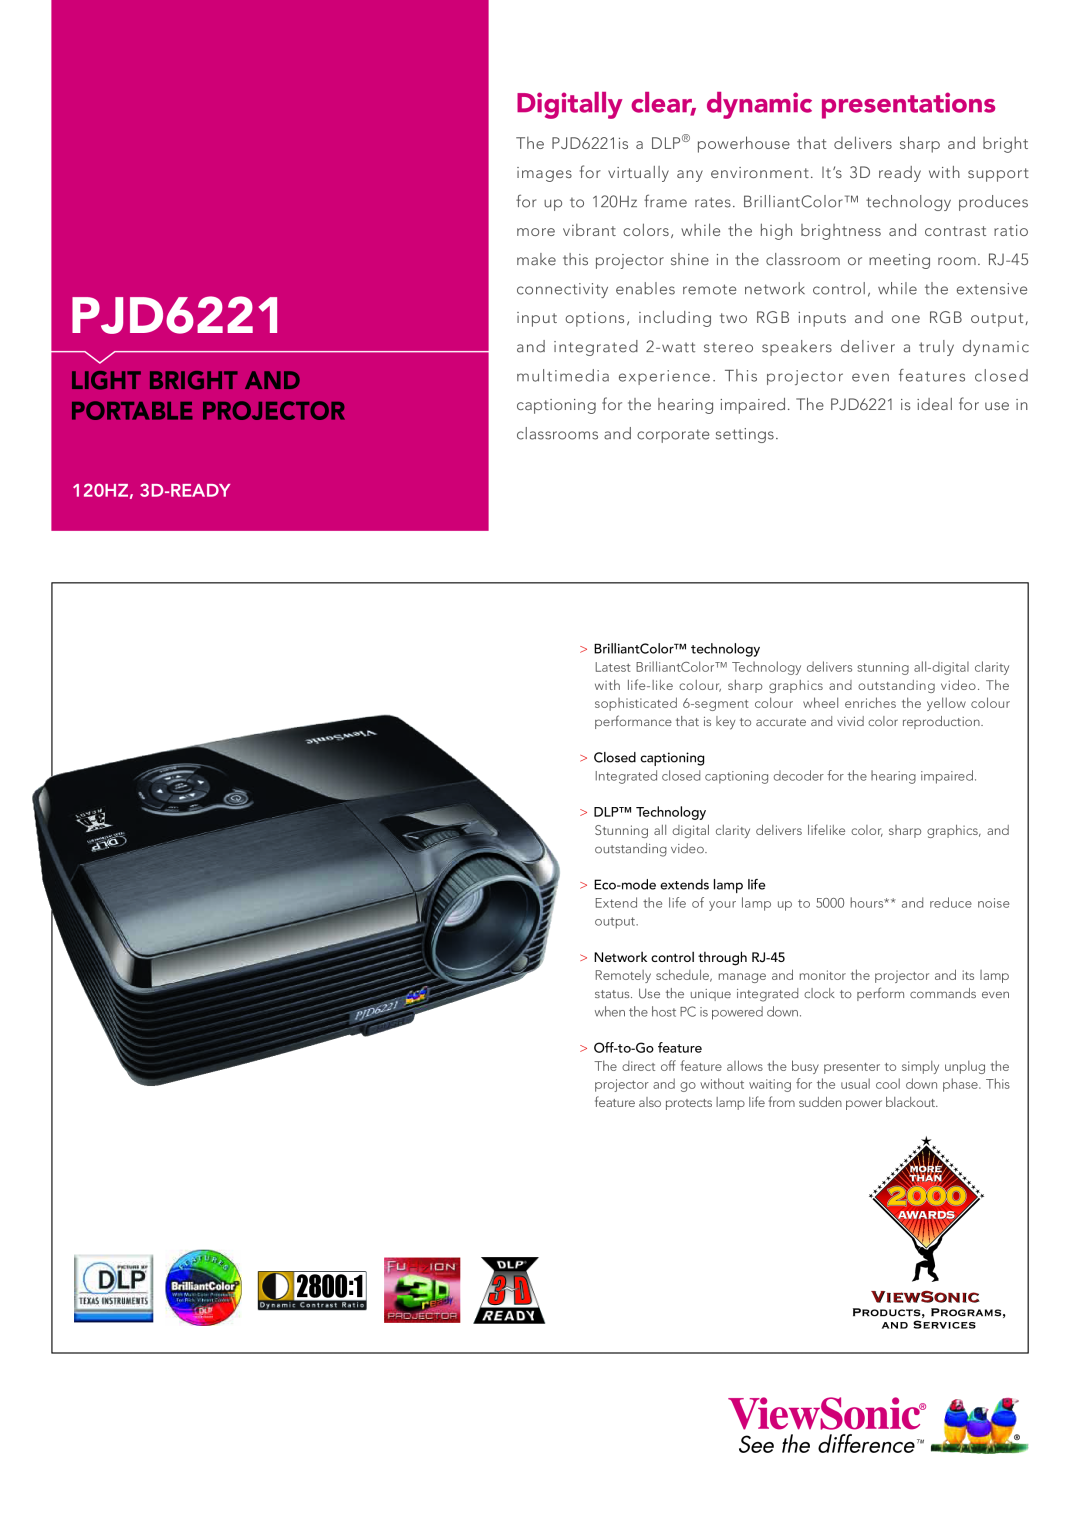 ViewSonic PJD6221 manual Digitally clear, dynamic presentations, 2800, Light Bright And Portable Projector 